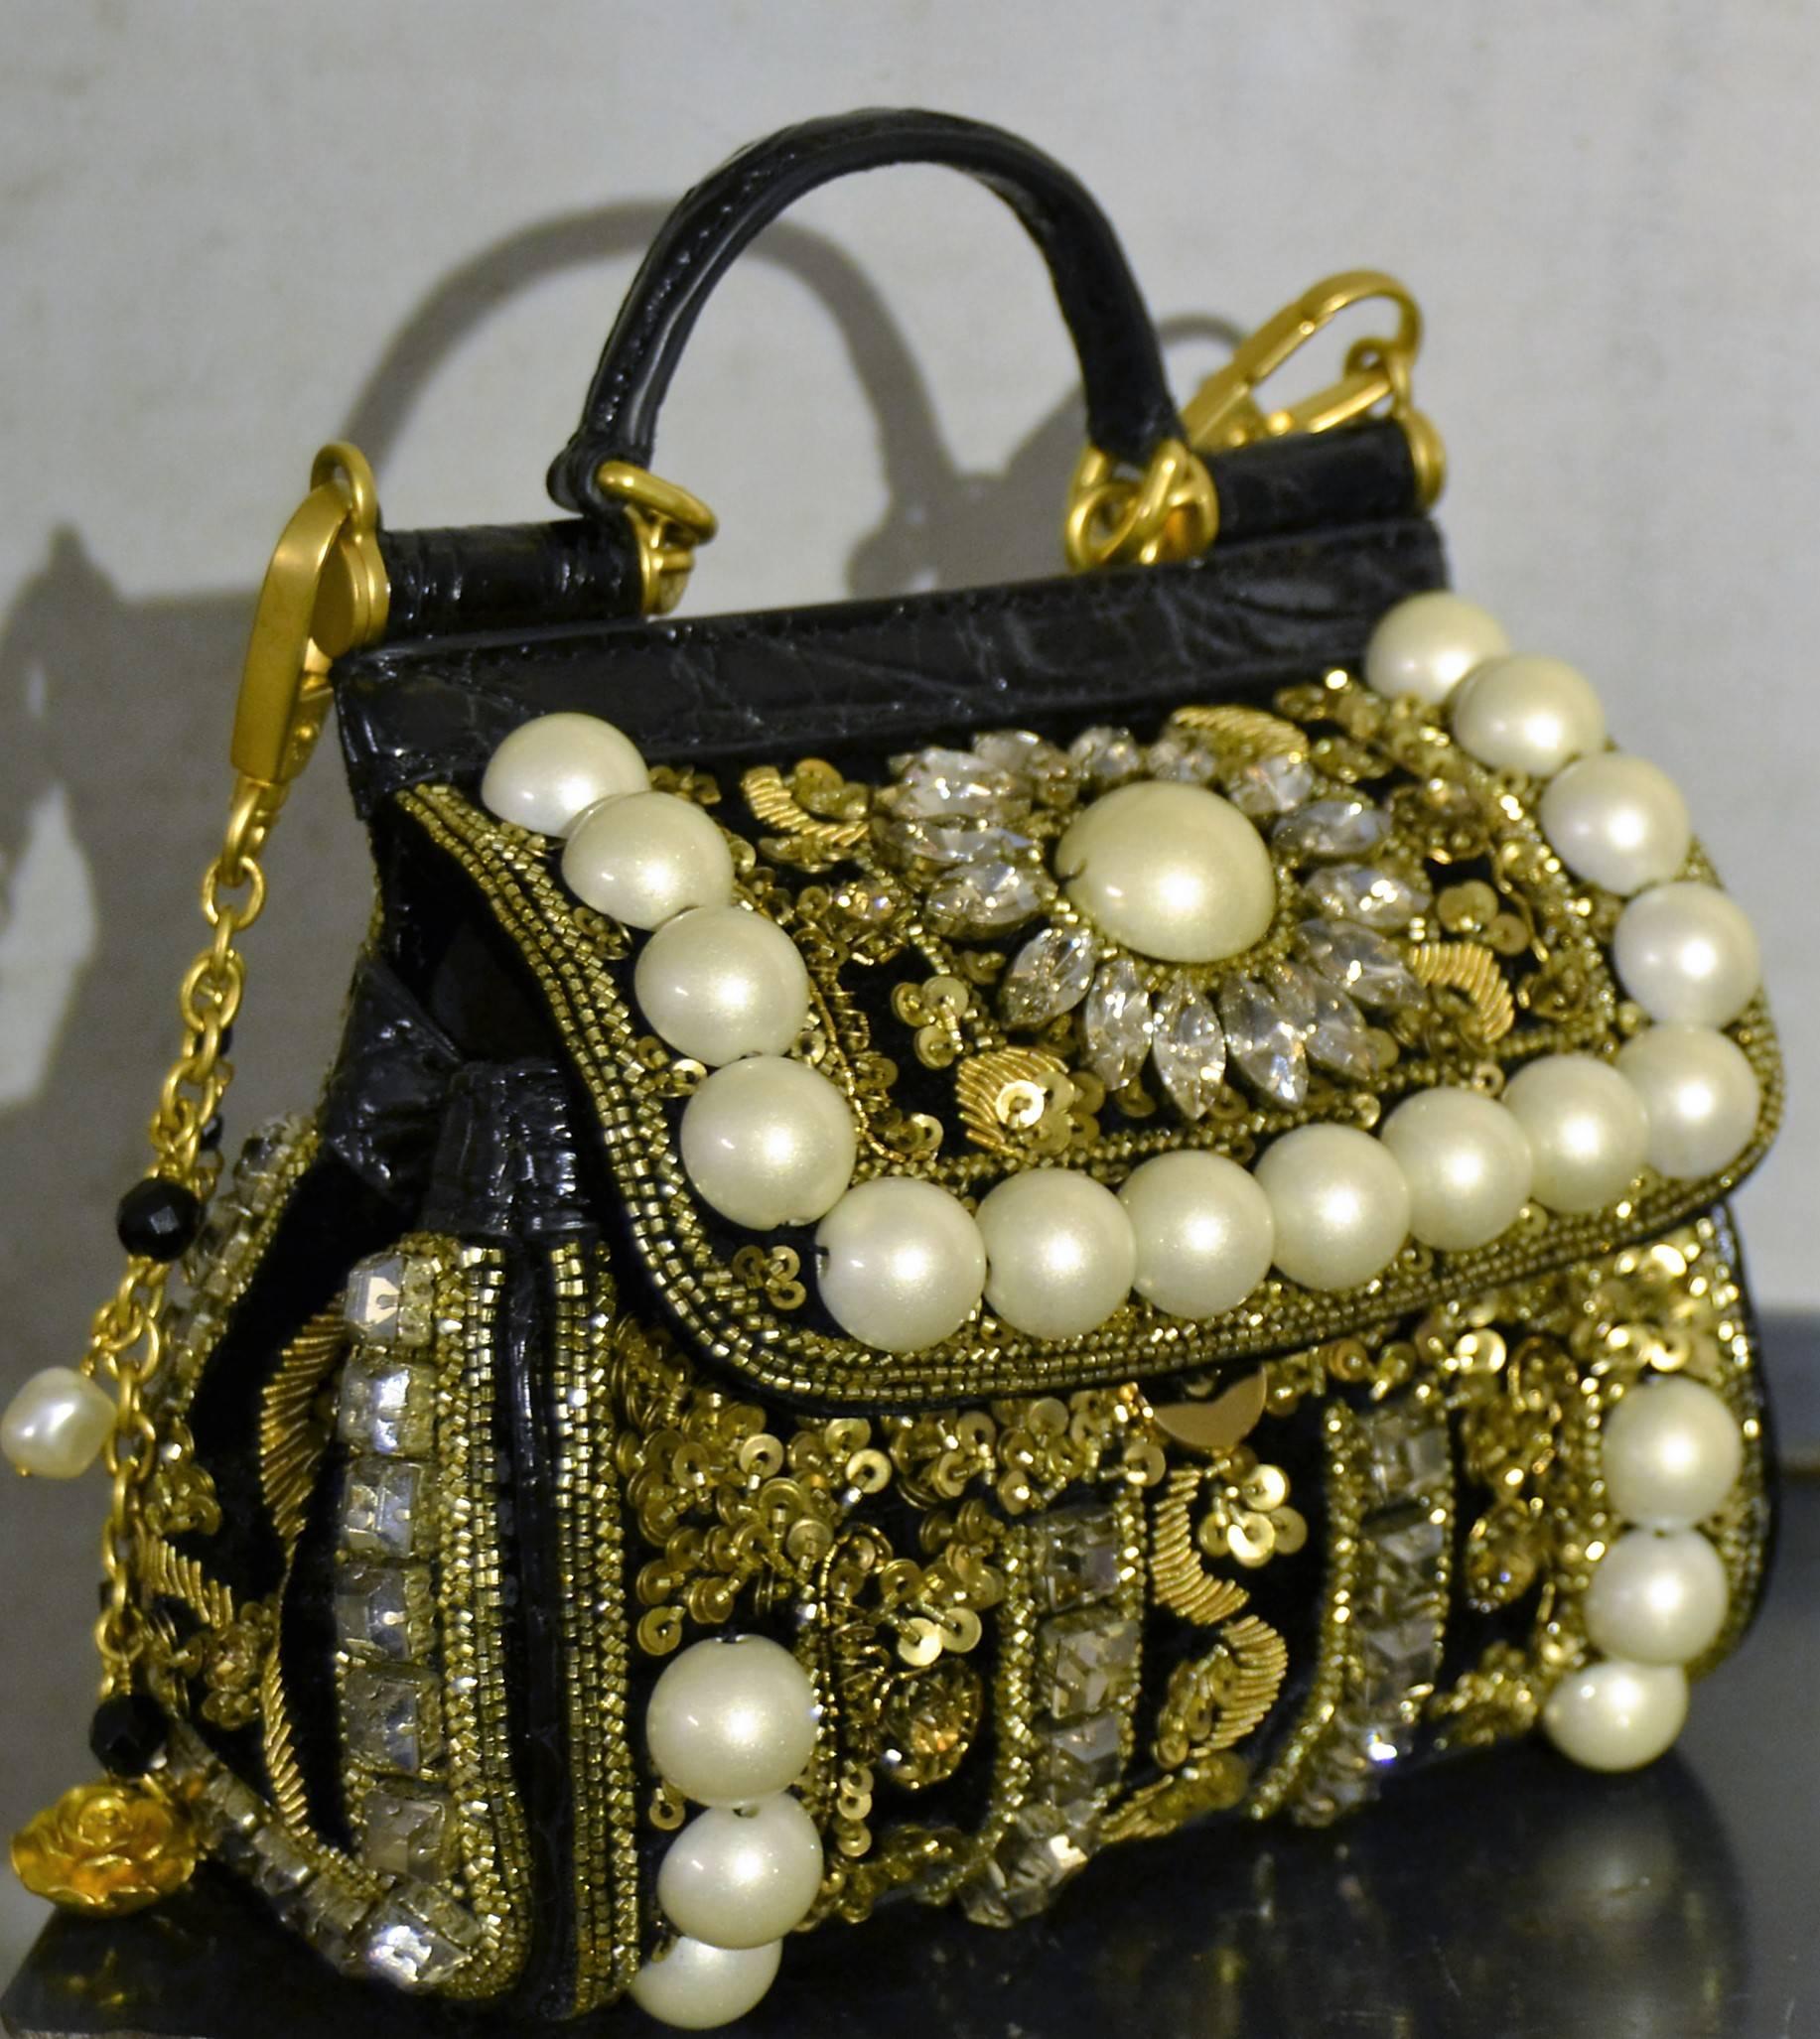 2014 Dolce & Gabbana Small Sicily bag with pearls 5